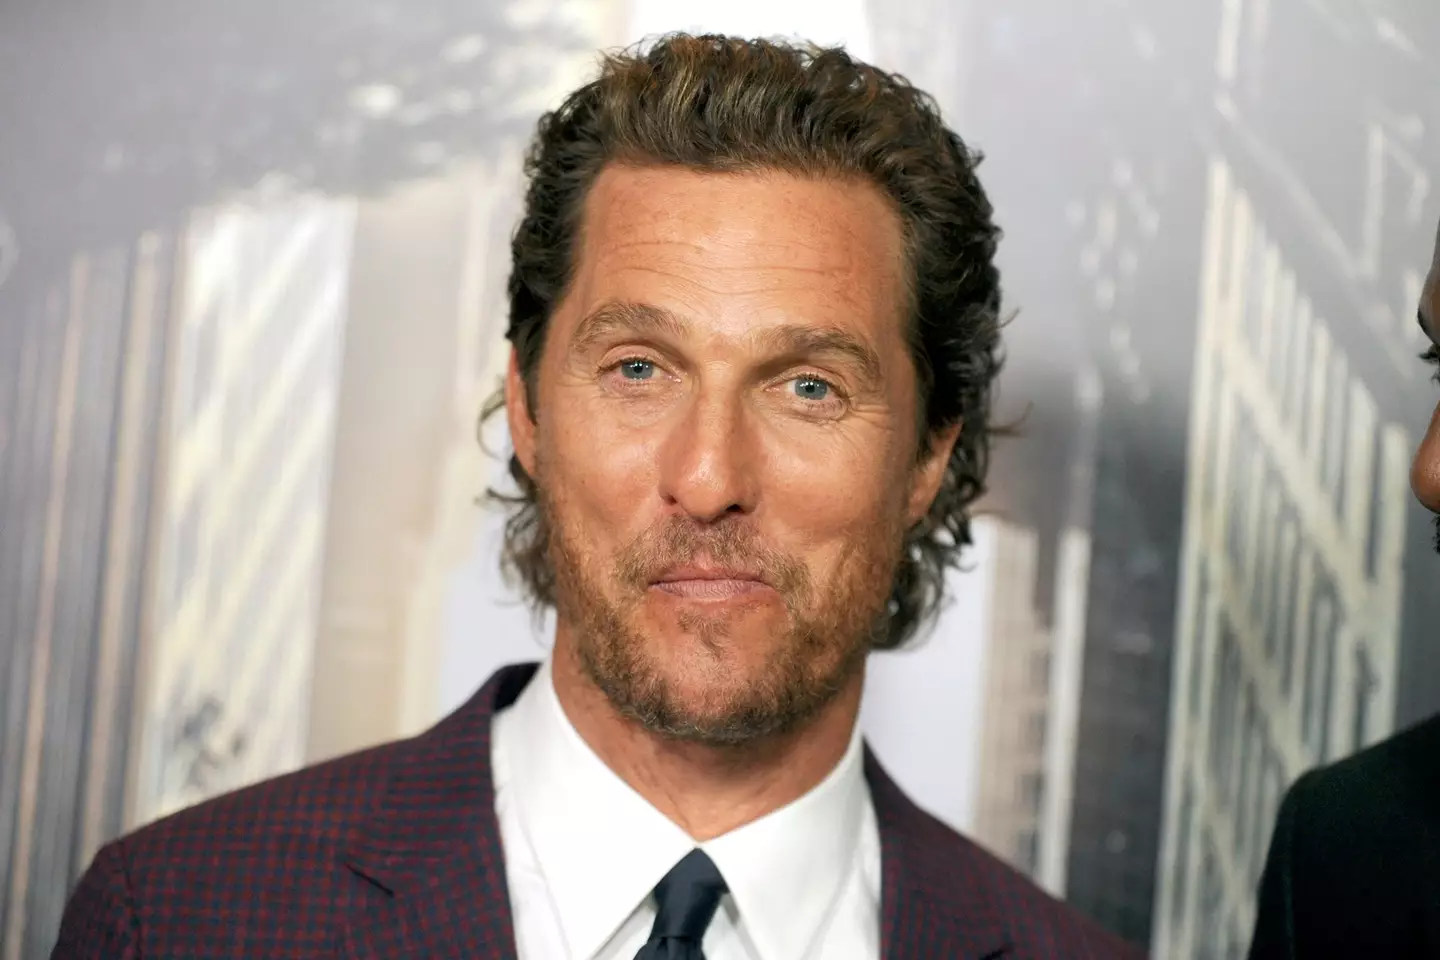 McConaughey doesn't find anything unbelievable.